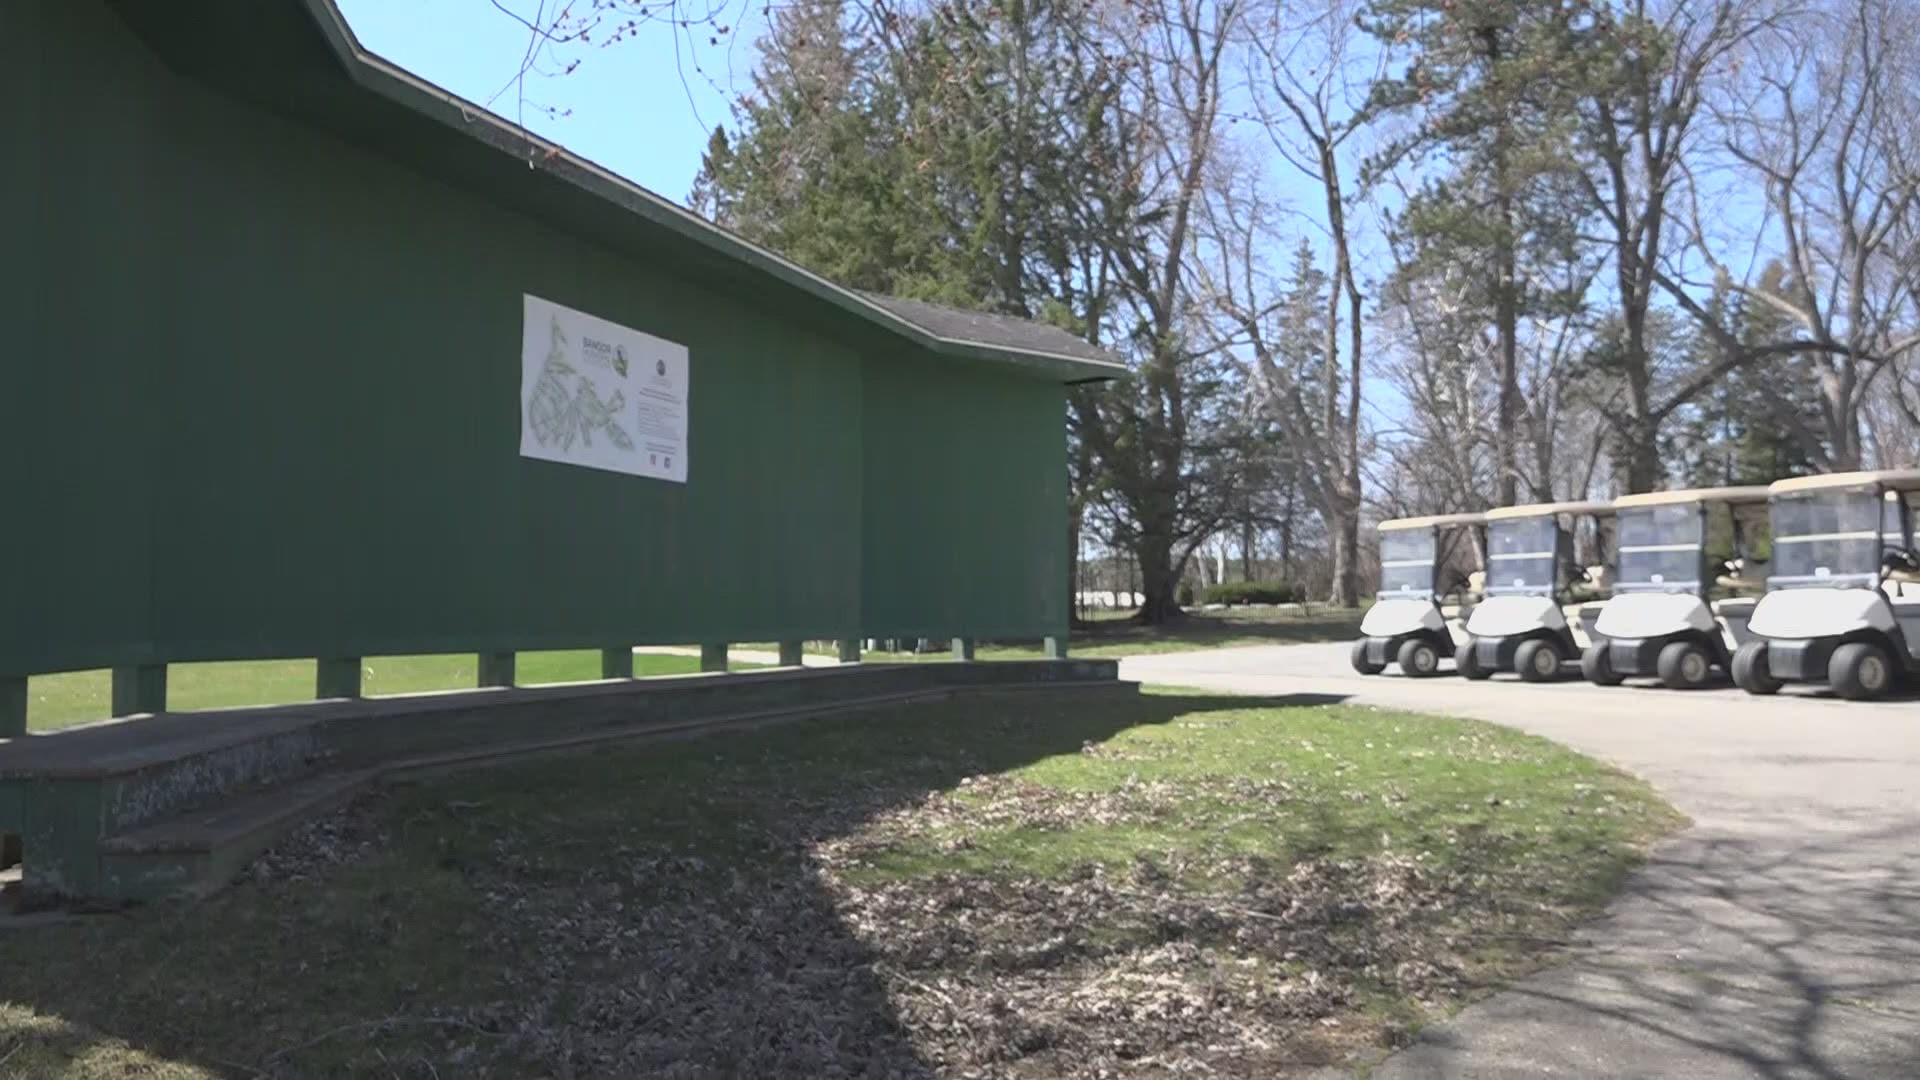 After a record year when everyone needed to get outdoors at the height of the COVID crisis...  golf courses around the state are hoping the momentum continues into 2